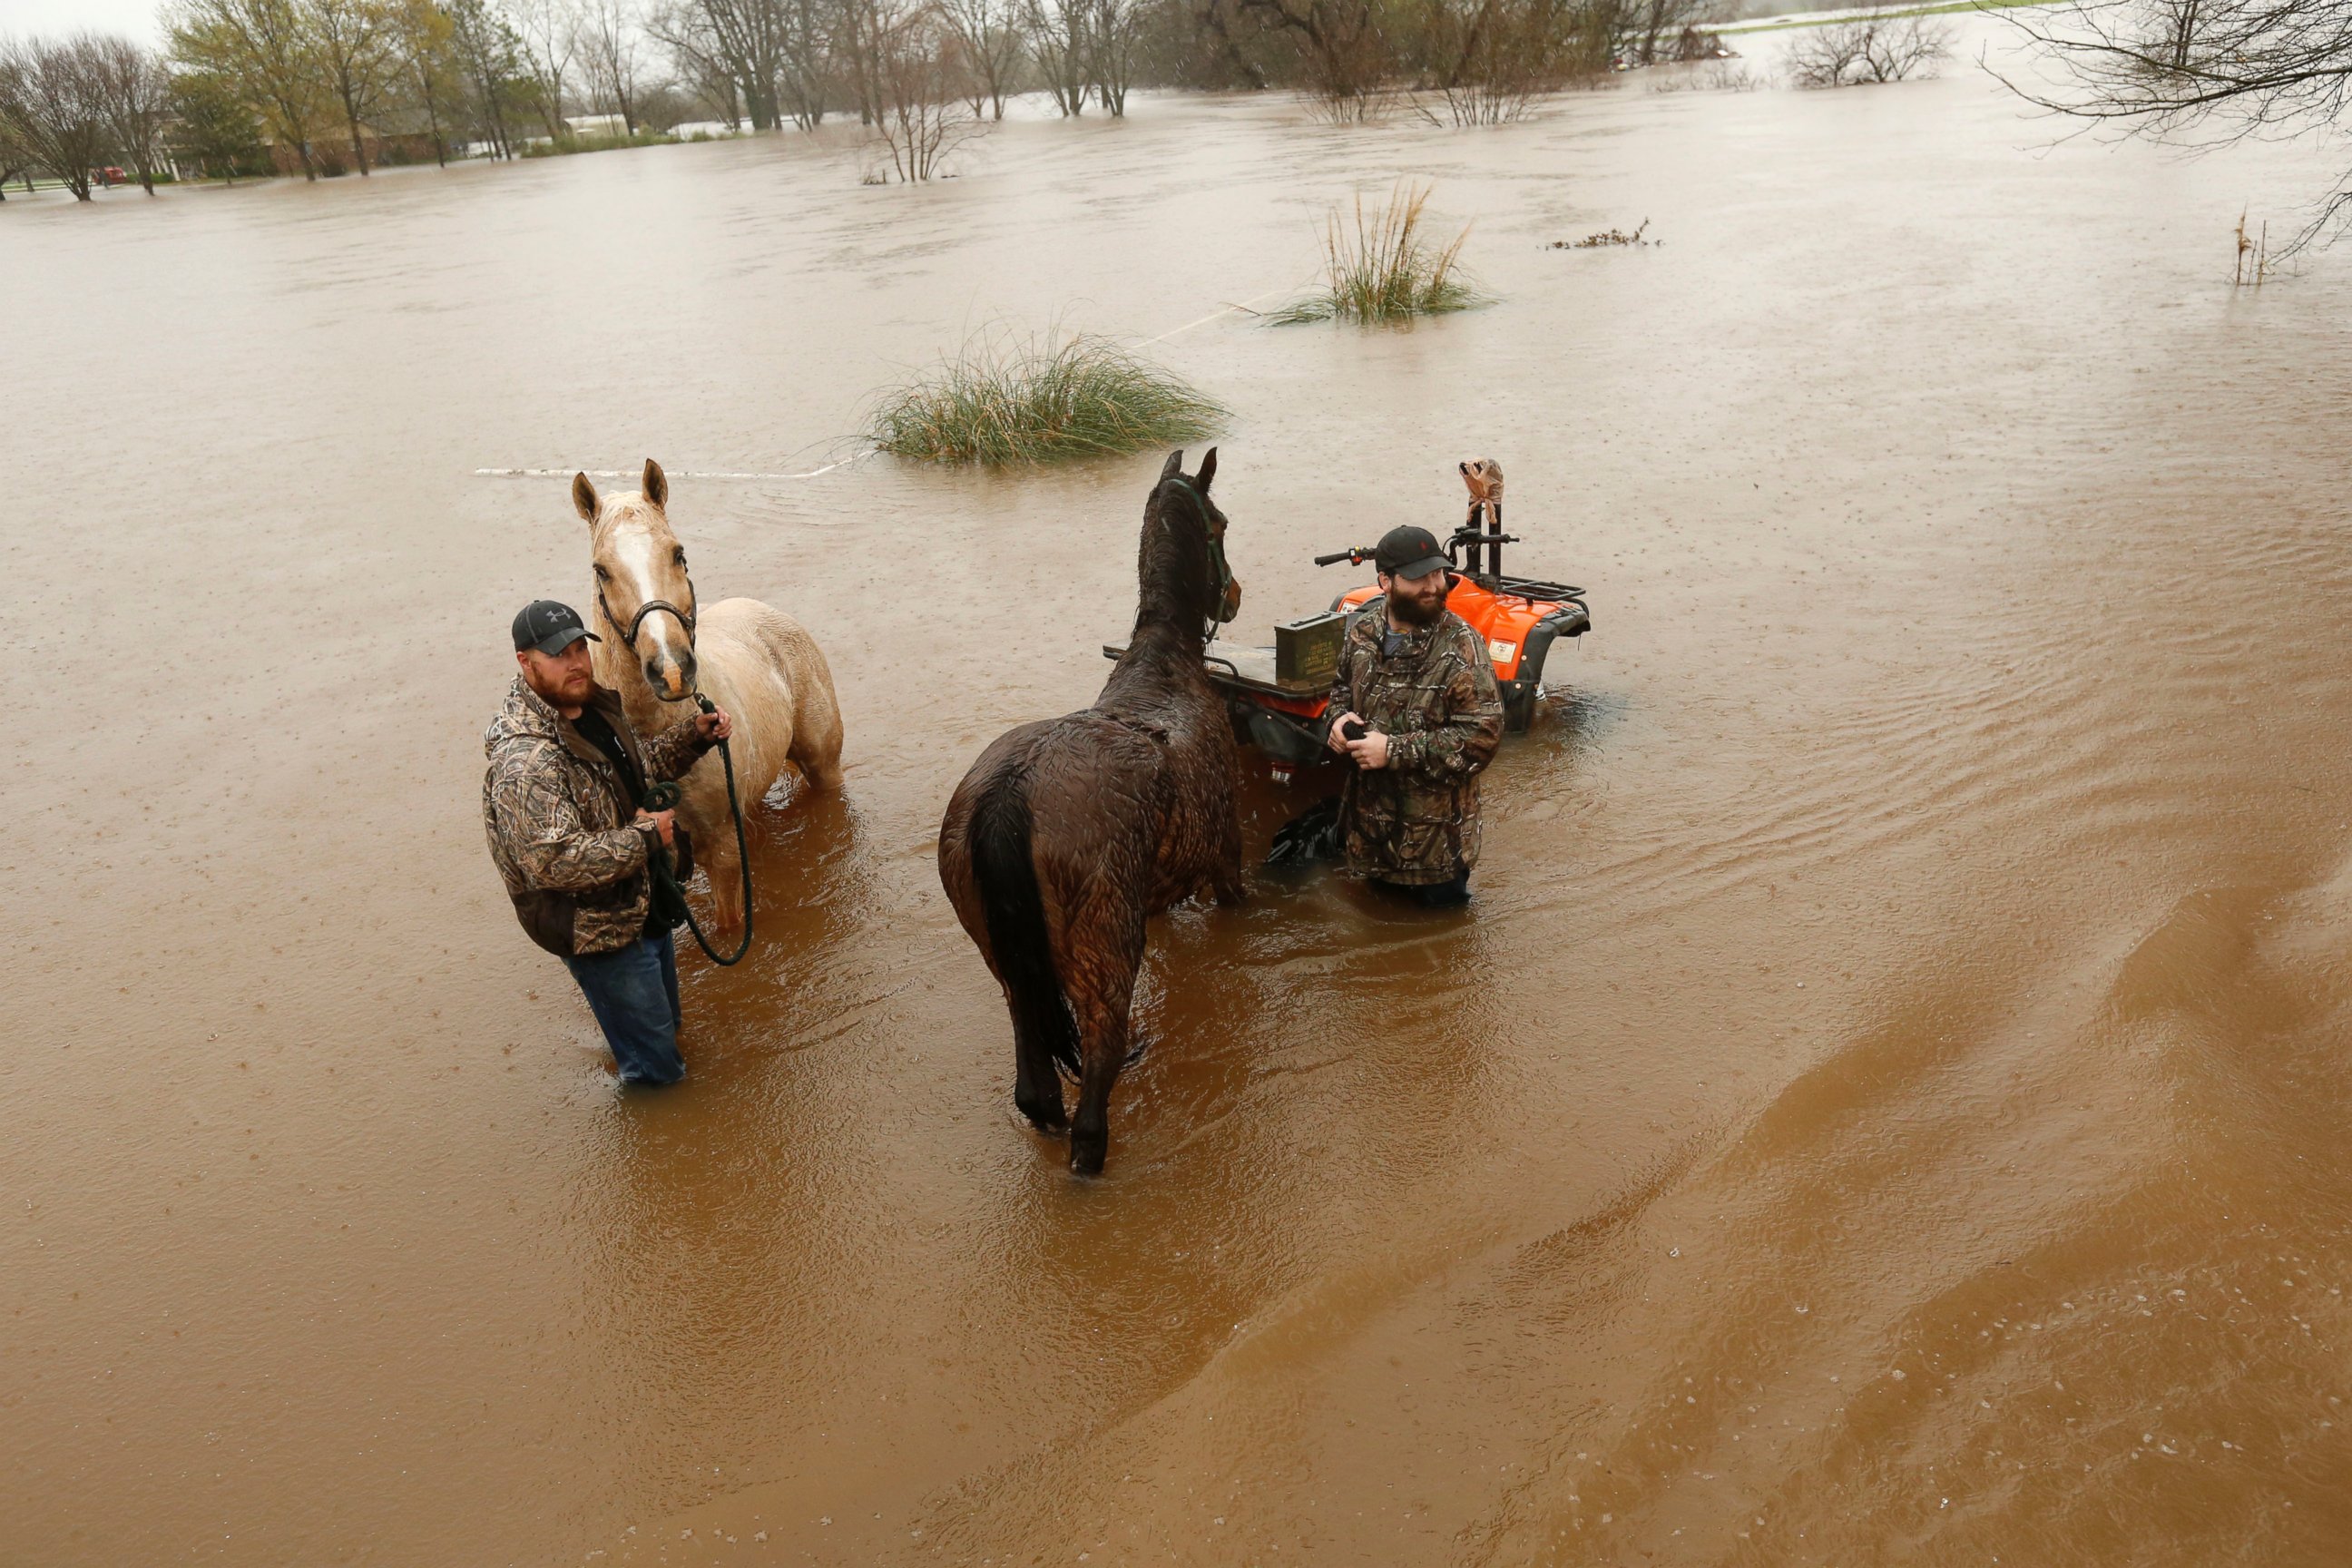 PHOTO: Two men secure two horses in rising floodwaters in Bossier Parish, La., March 10, 2016.